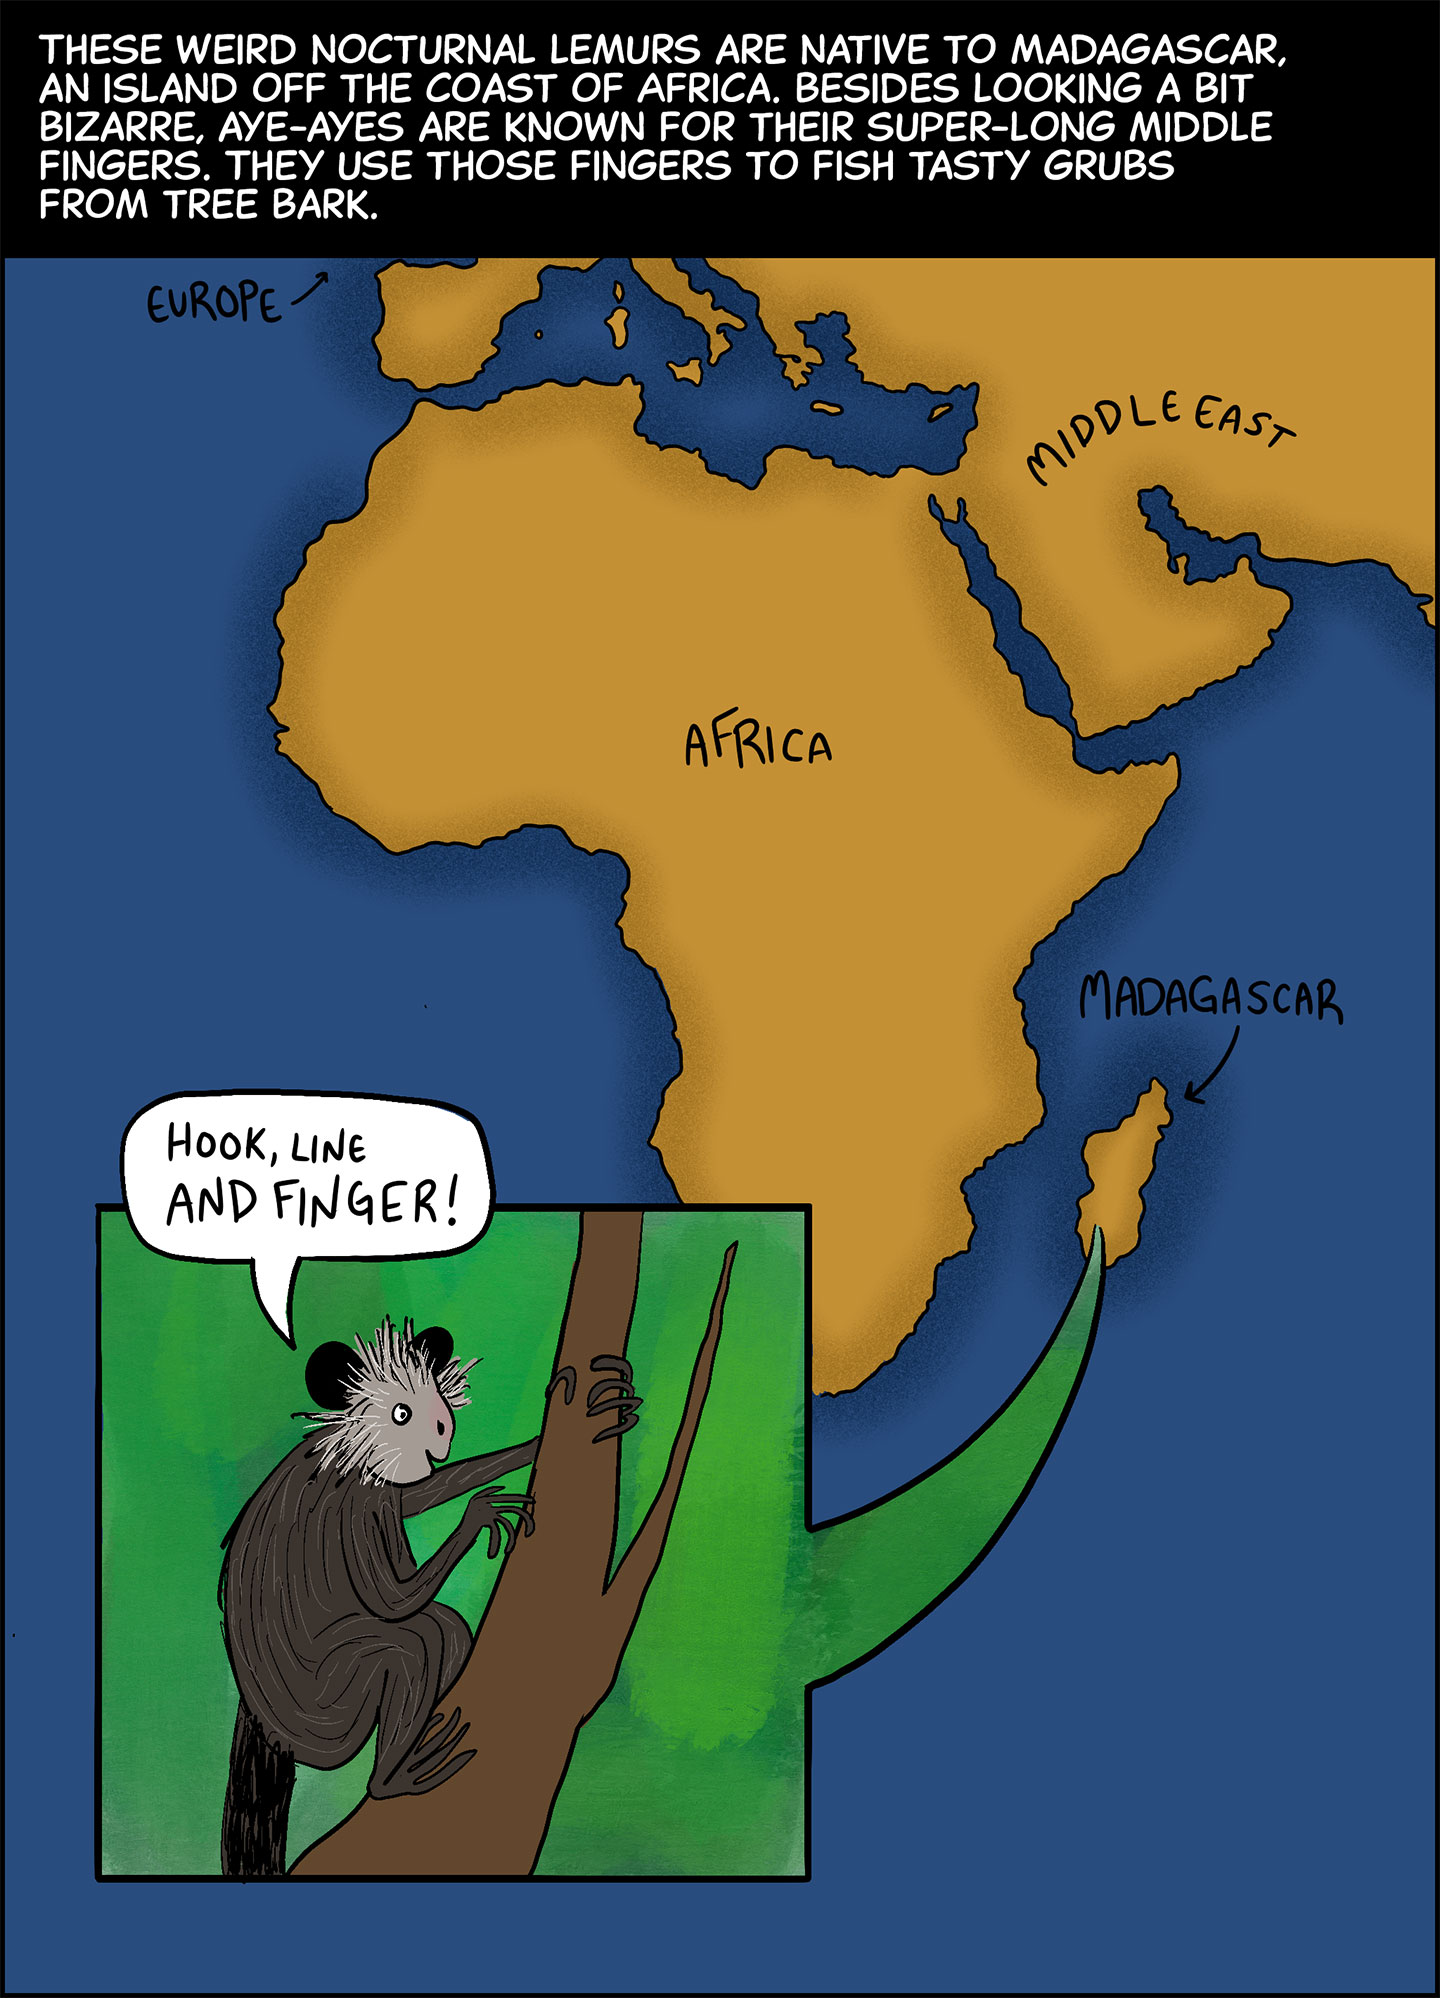 Panel 3. Text (above image): These weird nocturnal lemurs are native to Madagascar, an island off the coast of Africa. Besides looking a bit bizarre, aye-ayes are known for their super-long middle fingers. They use those fingers to fish tasty grubs from tree bark. Image: A map shows Africa, Europe and the Middle East, with the island of Madagascar just off the eastern coast of Africa. An inset pointing to Madagascar shows an aye-aye in a tree saying, “Hook, line and finger!” 